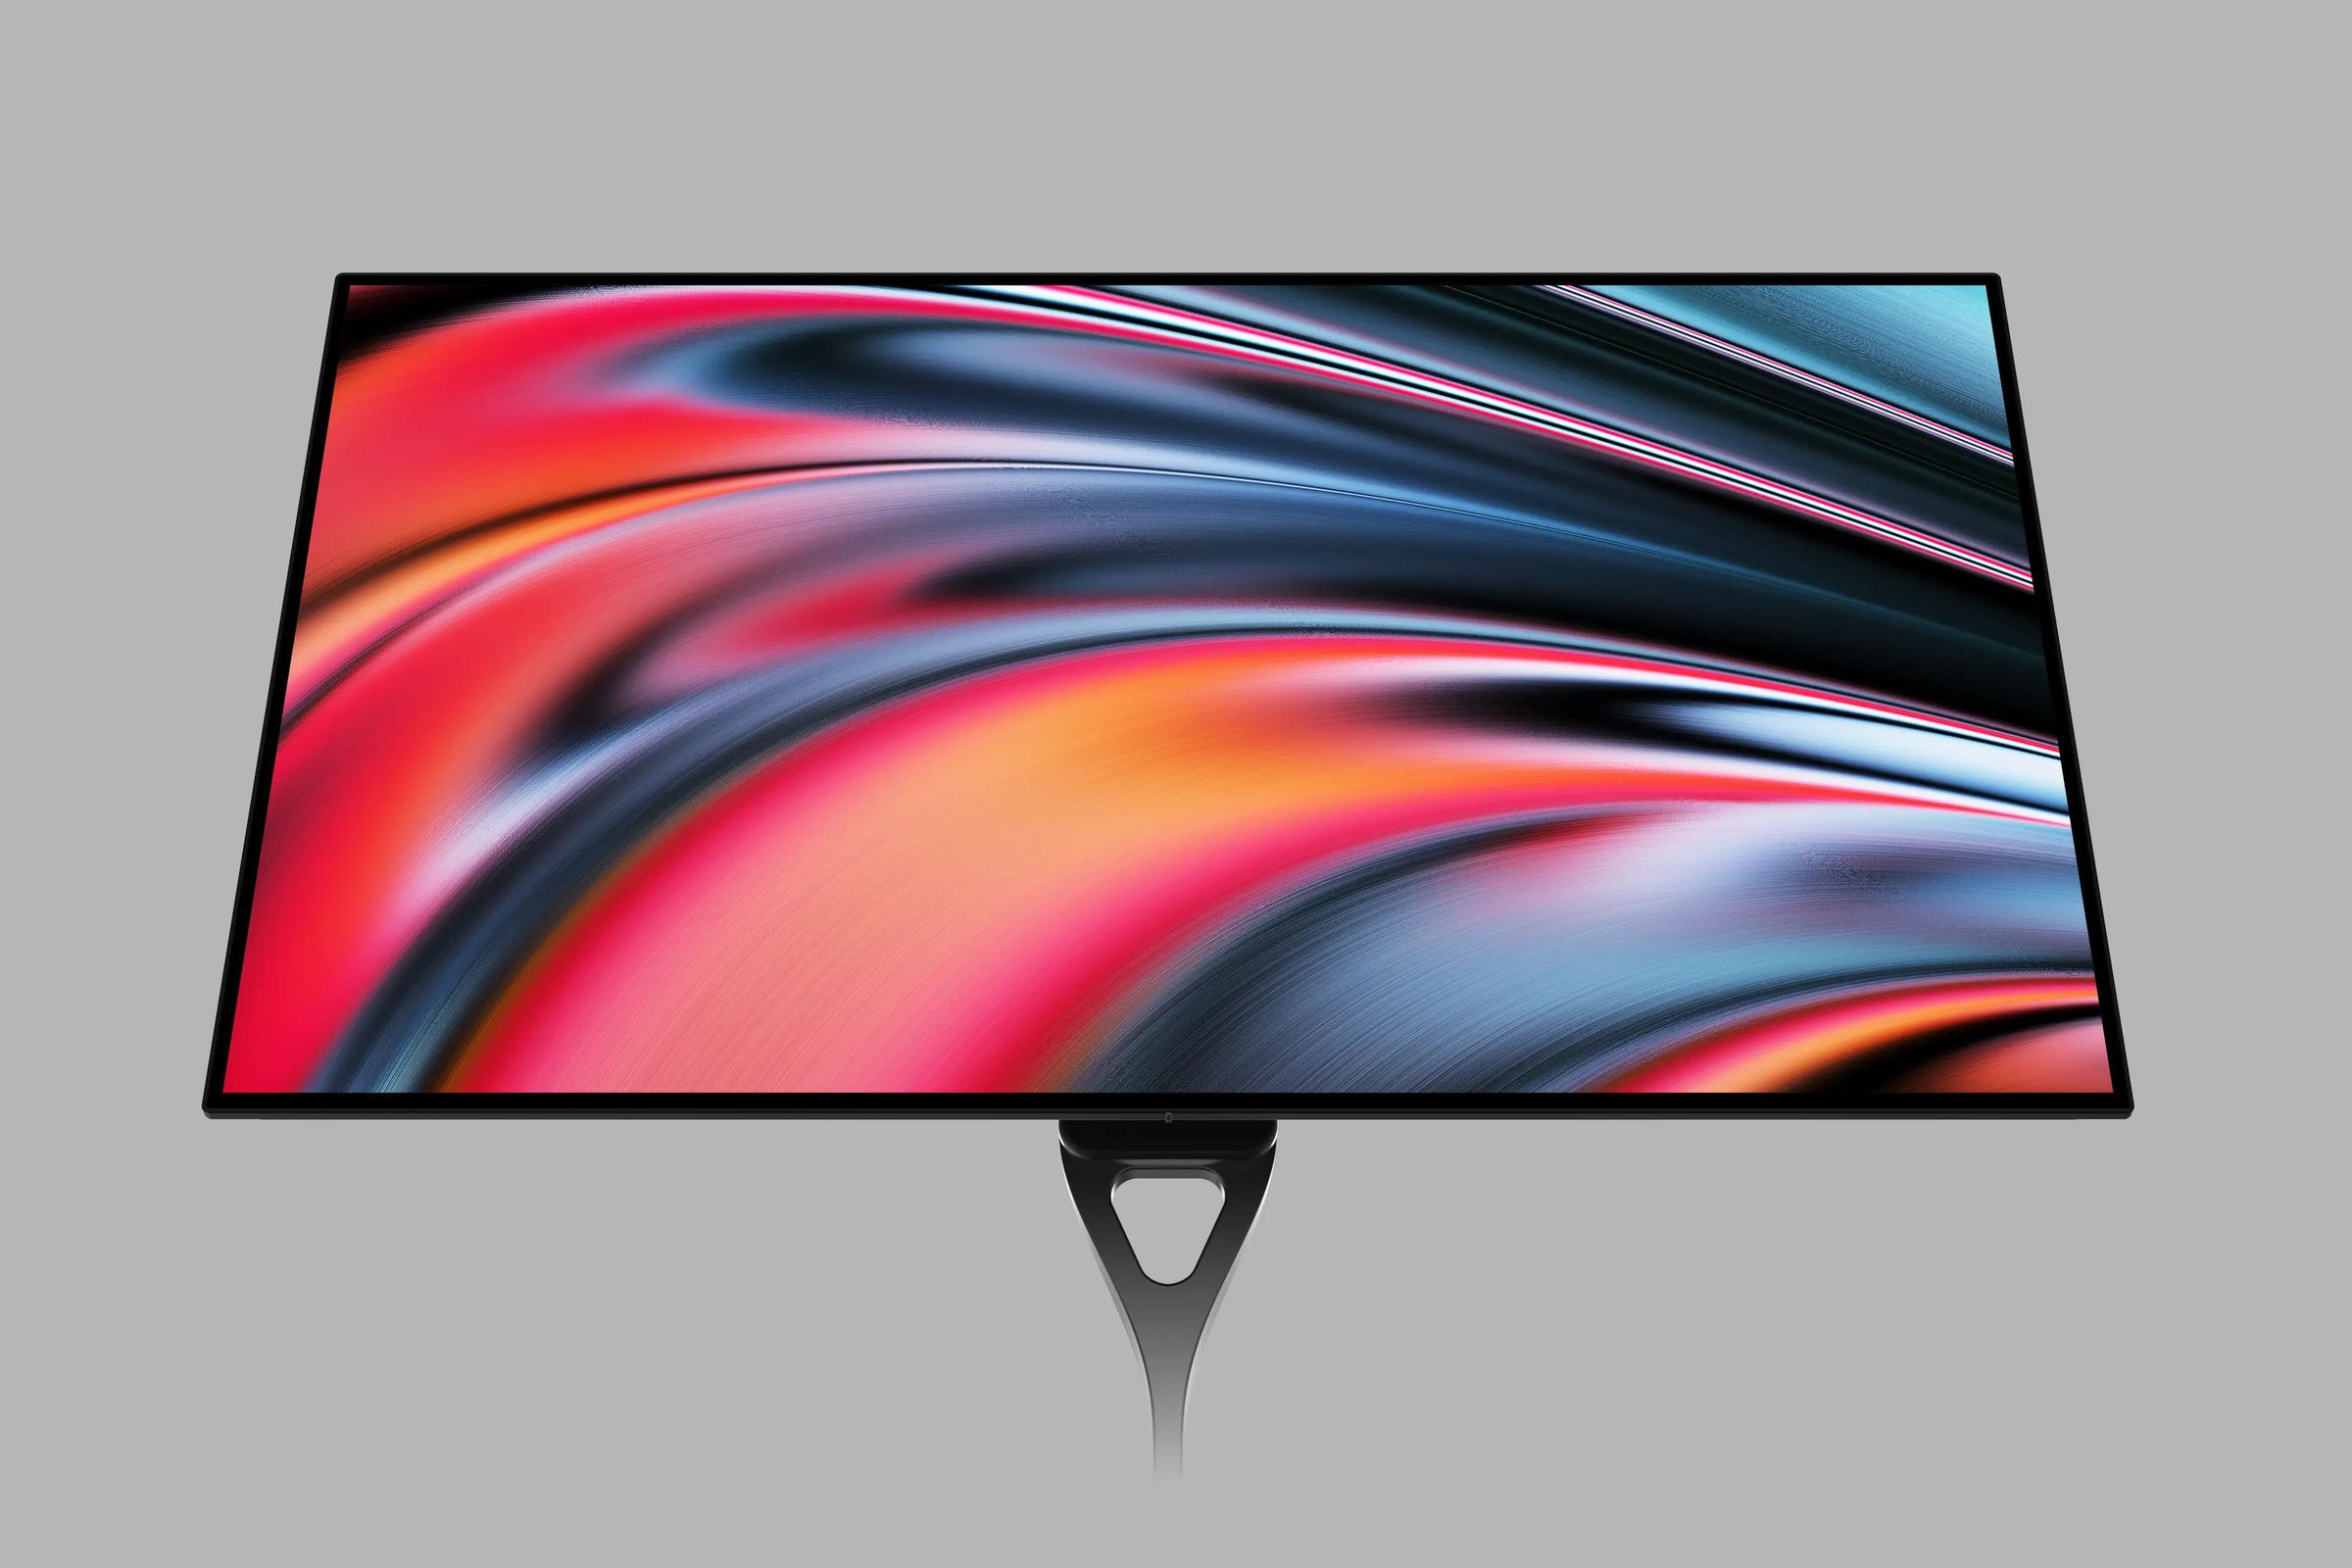 Wavy colors in a rectangular box with a thin monitor stand underneath.